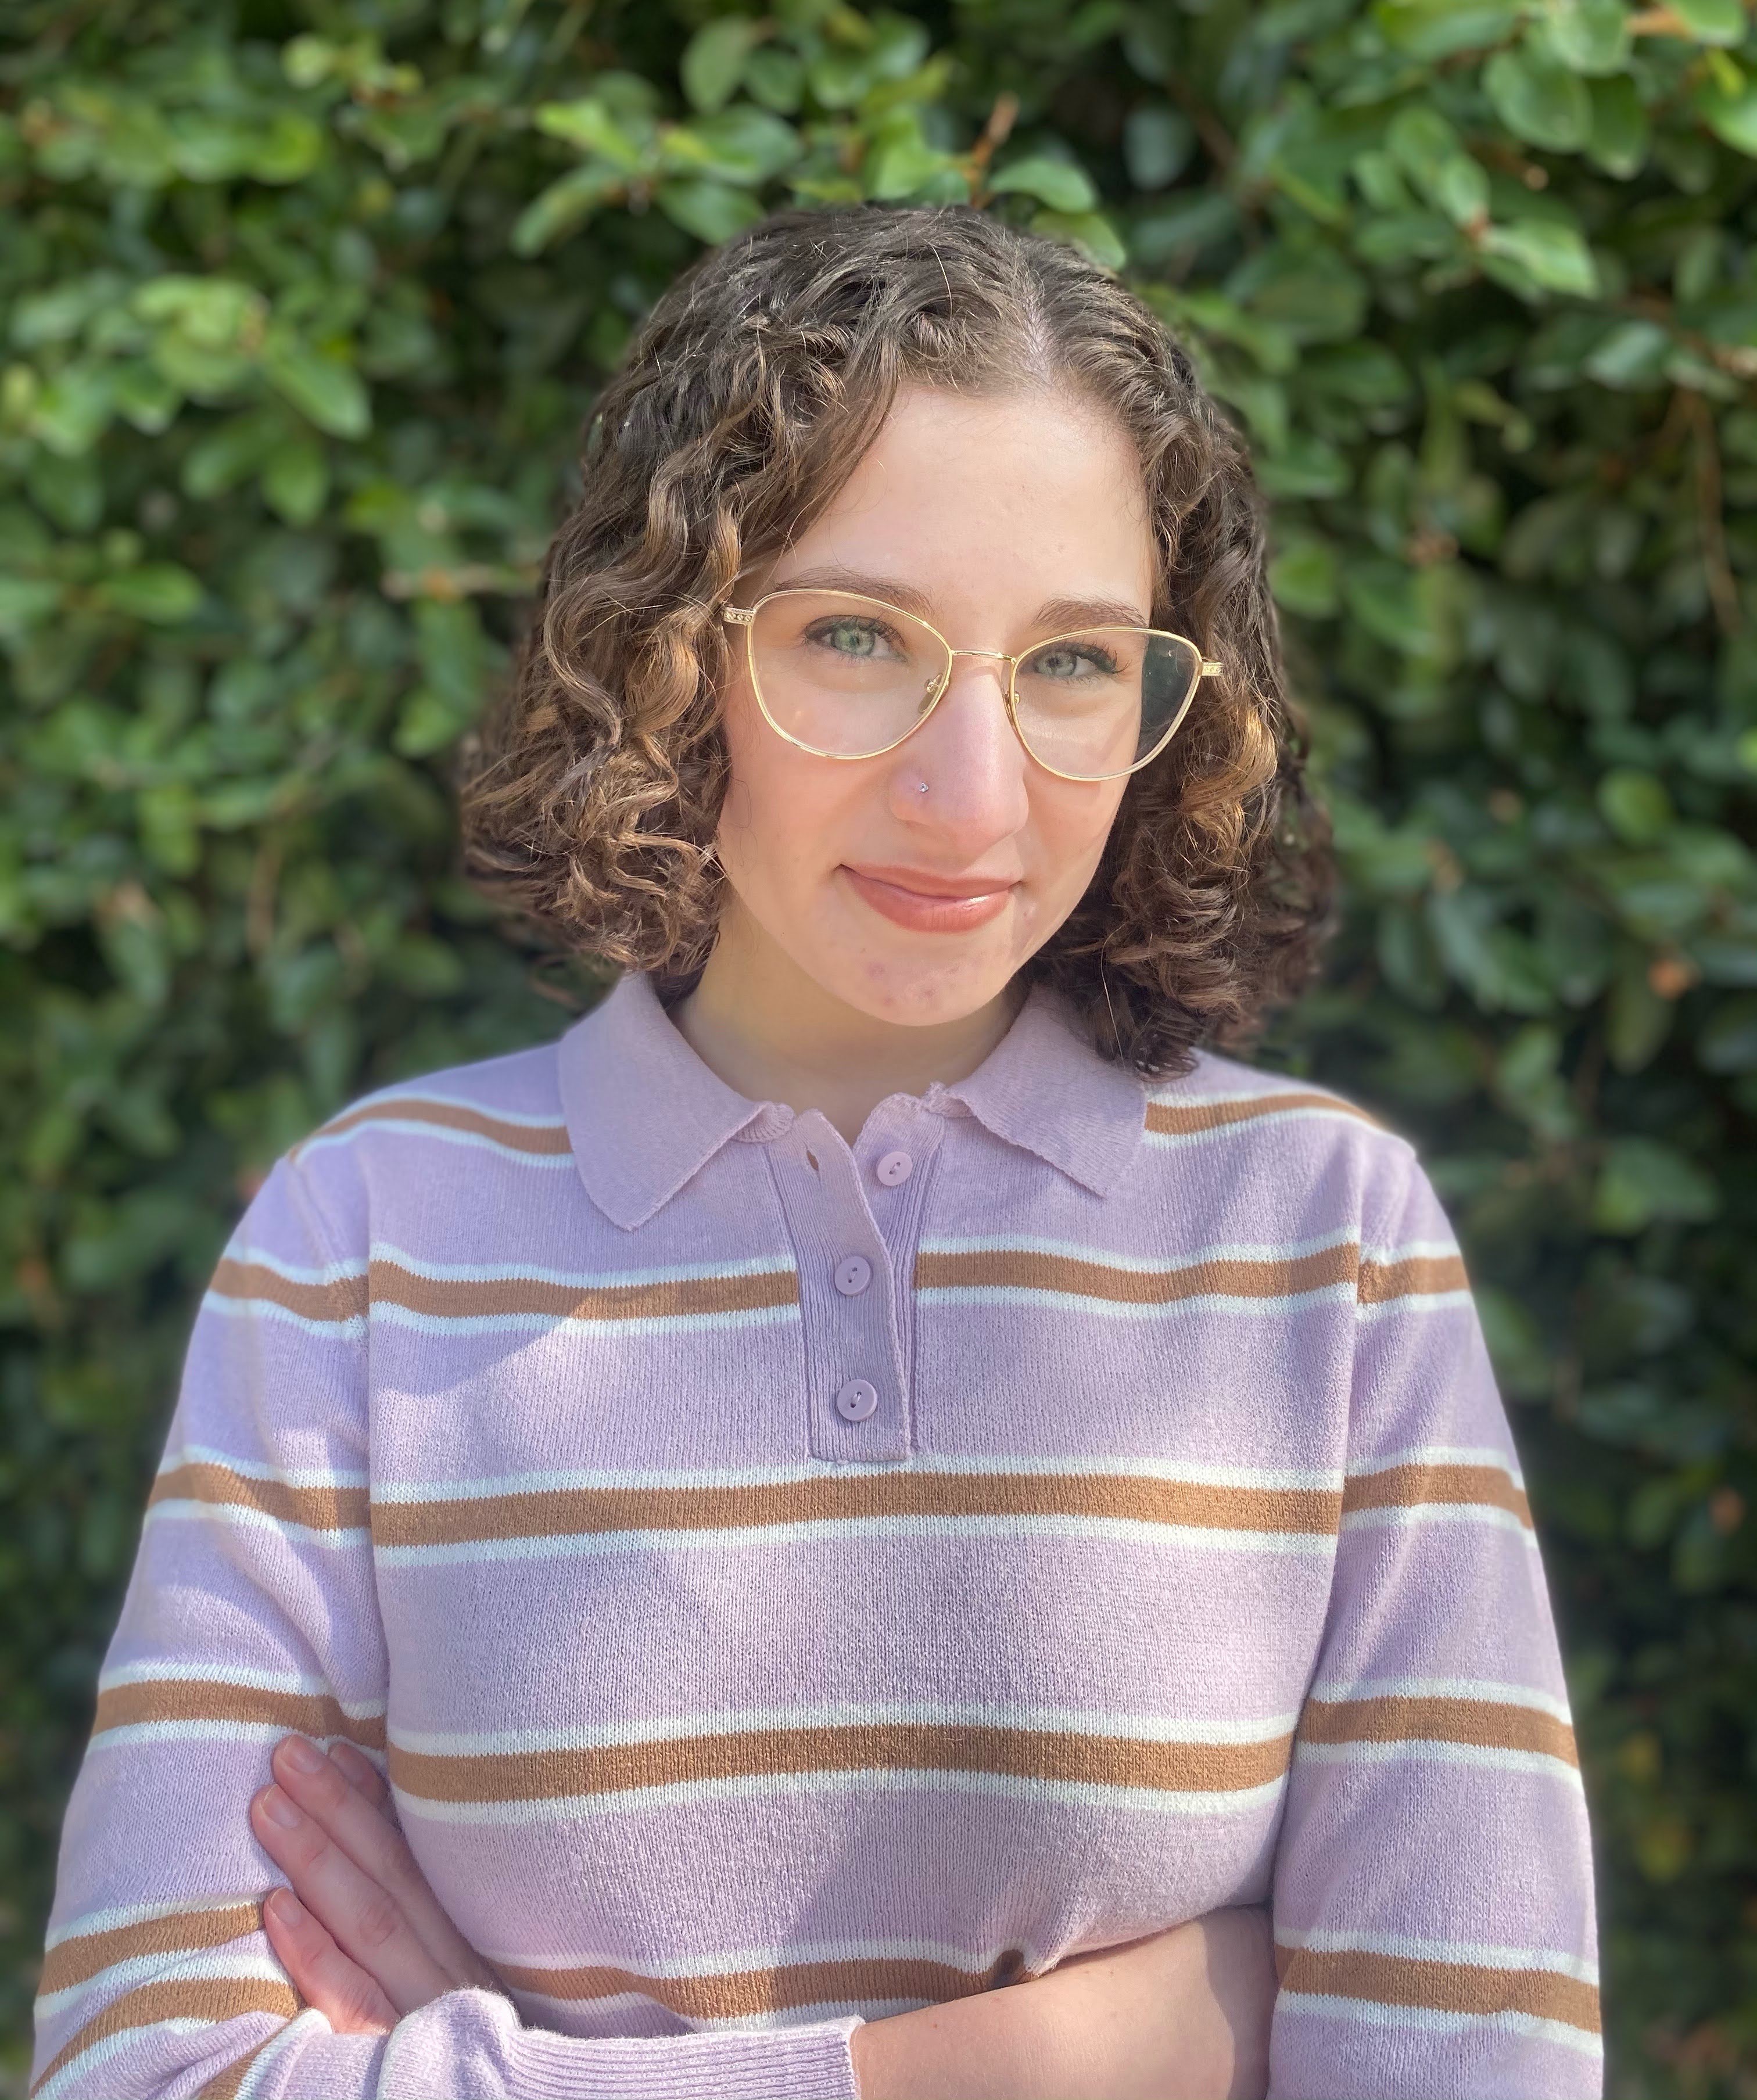 Sabrina has short, brown curly hair, eye glasses, and a purple and brown striped sweater on. She stands in front of greenery outside.